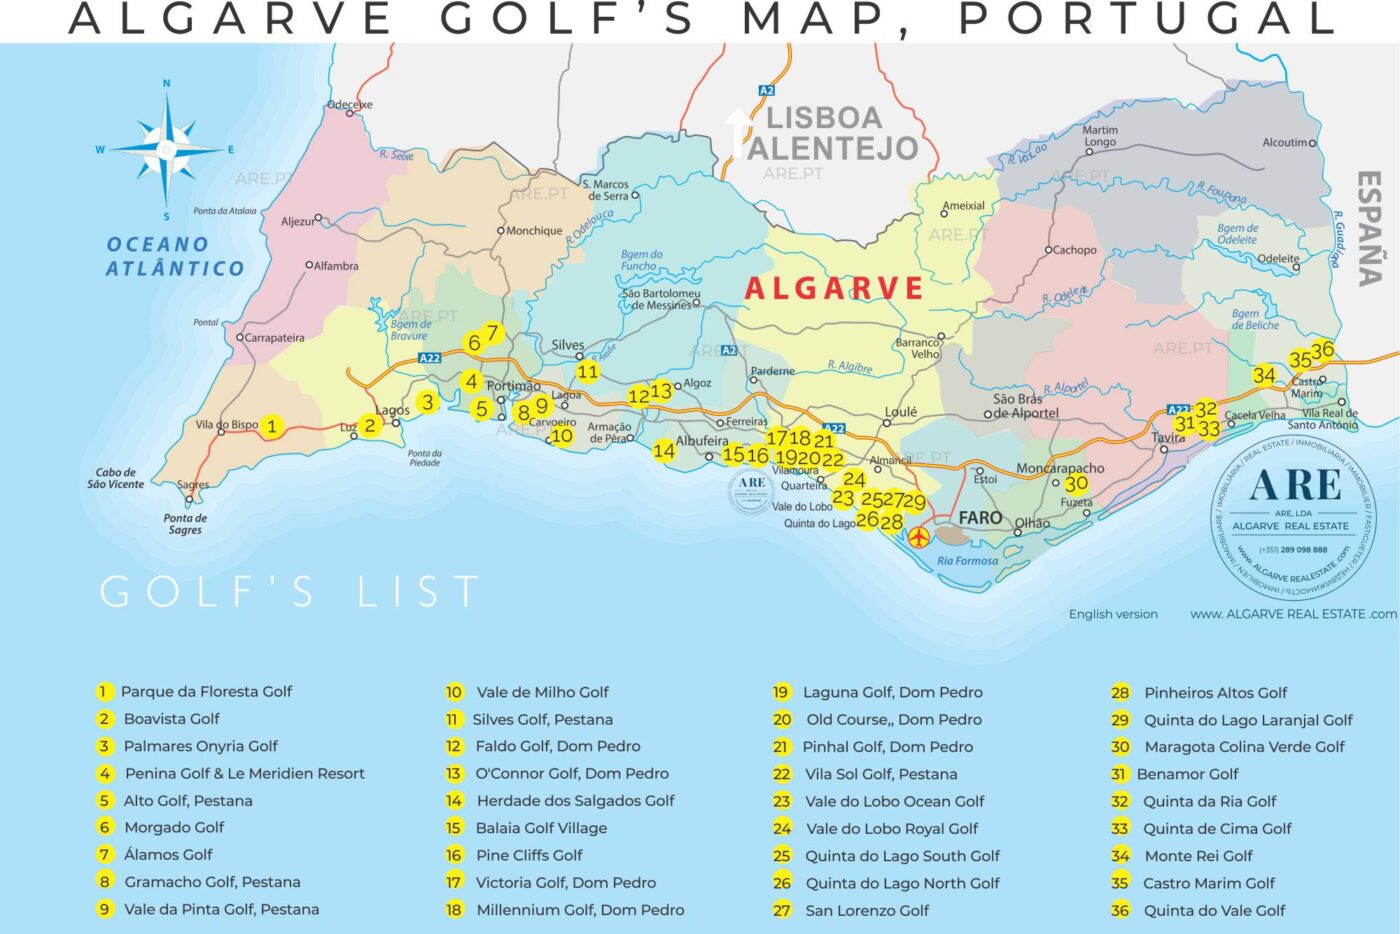 Map of the Algarve indicating 36 golf courses throughout the 16 municipalities.